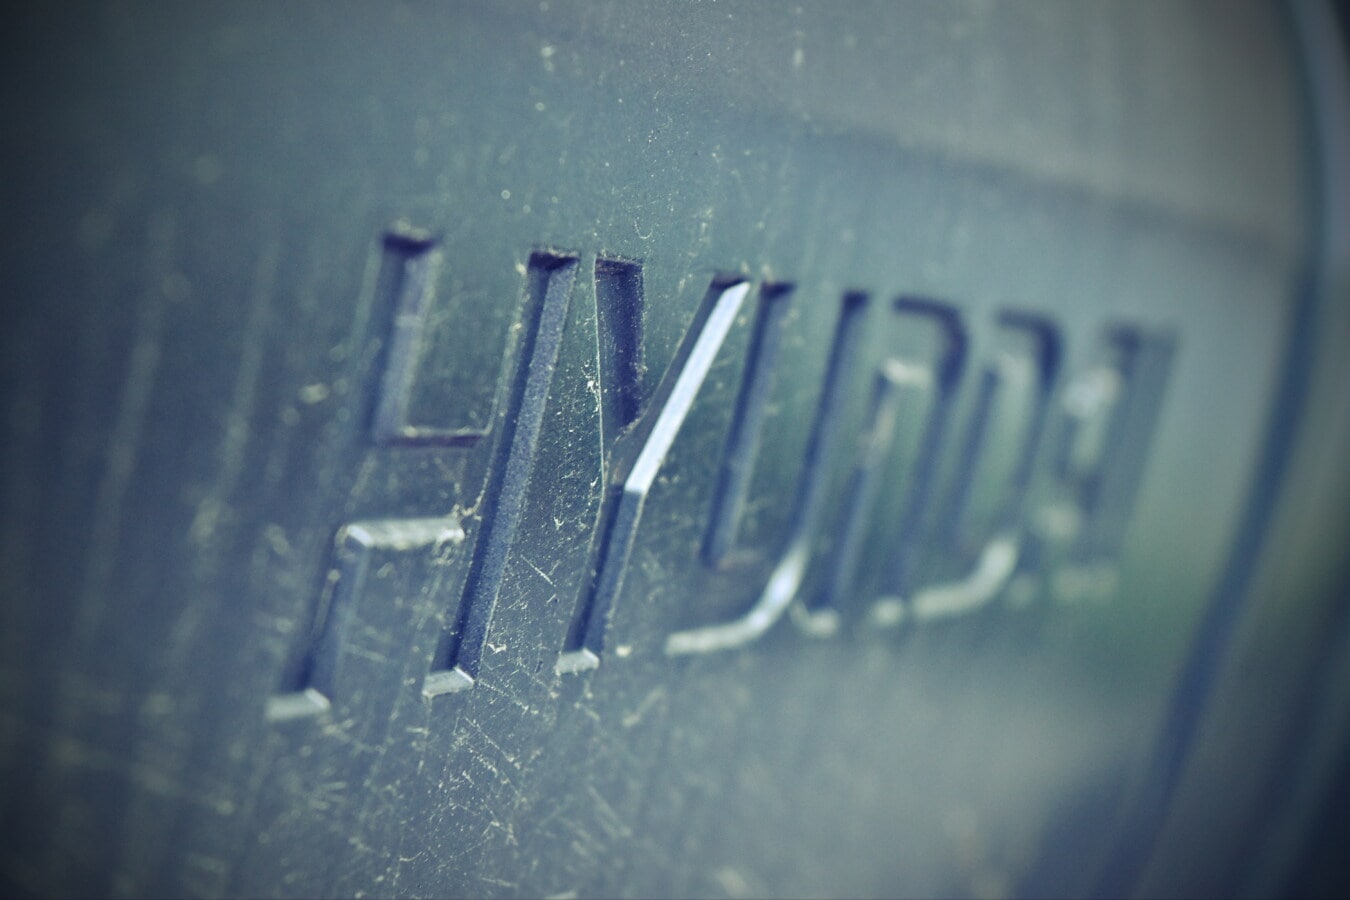 text, car, sign, symbol, metal, blur, technology, old, industry, reflection